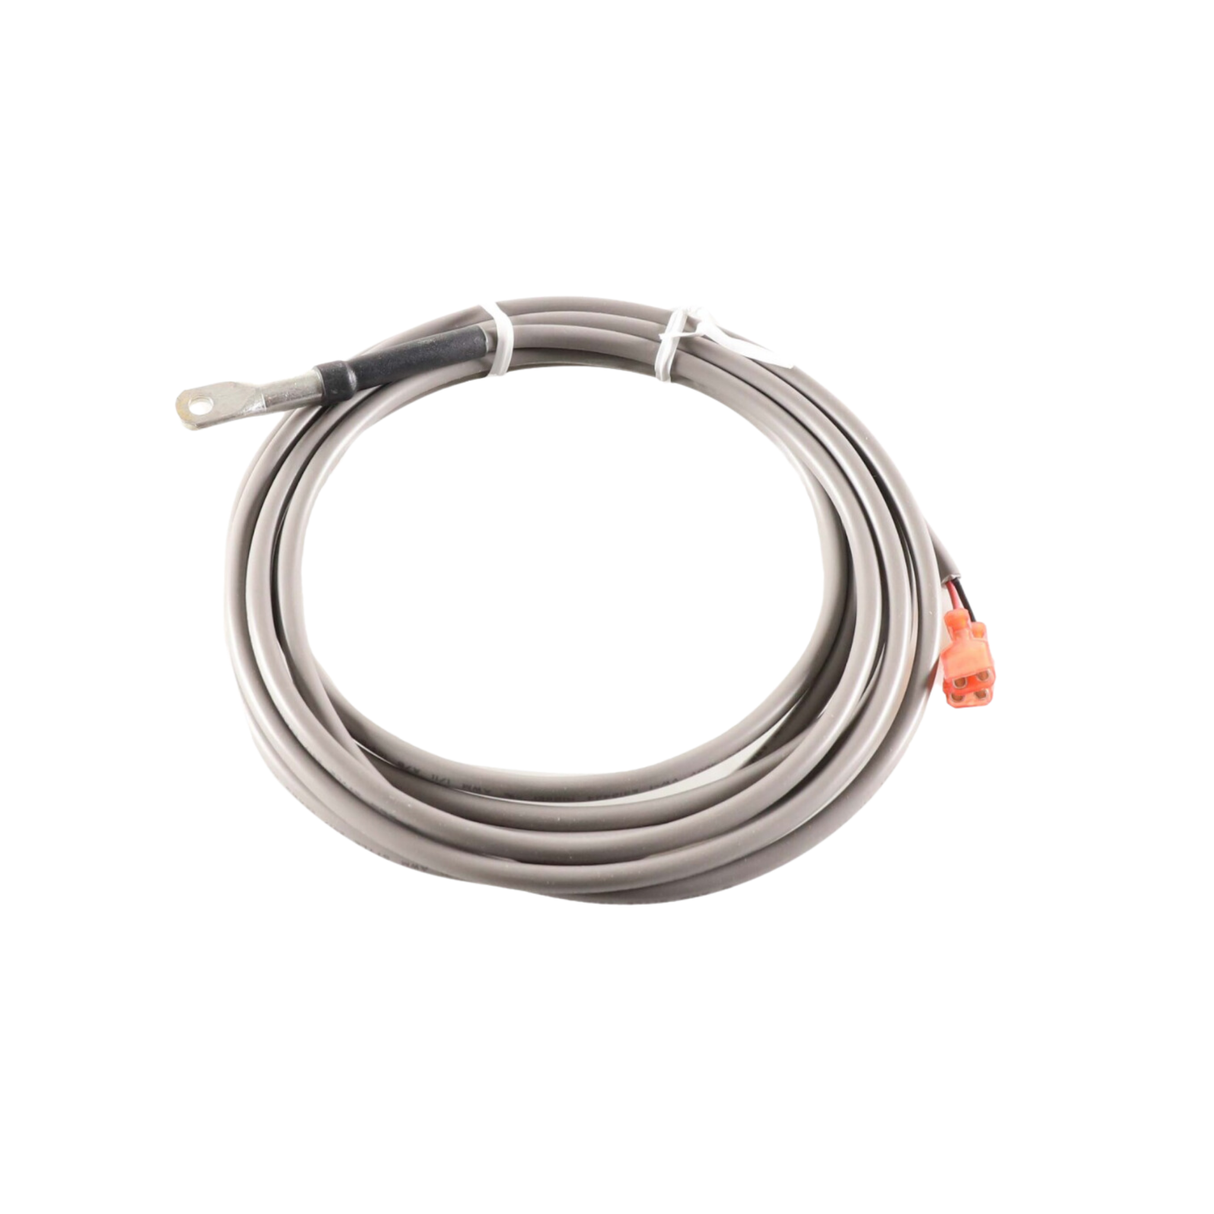 A.J. Antunes 808000100 10,000 Ohm Thermistor with 10' Cable for TCF Controller Rated to 221 Degree Fahrenheit